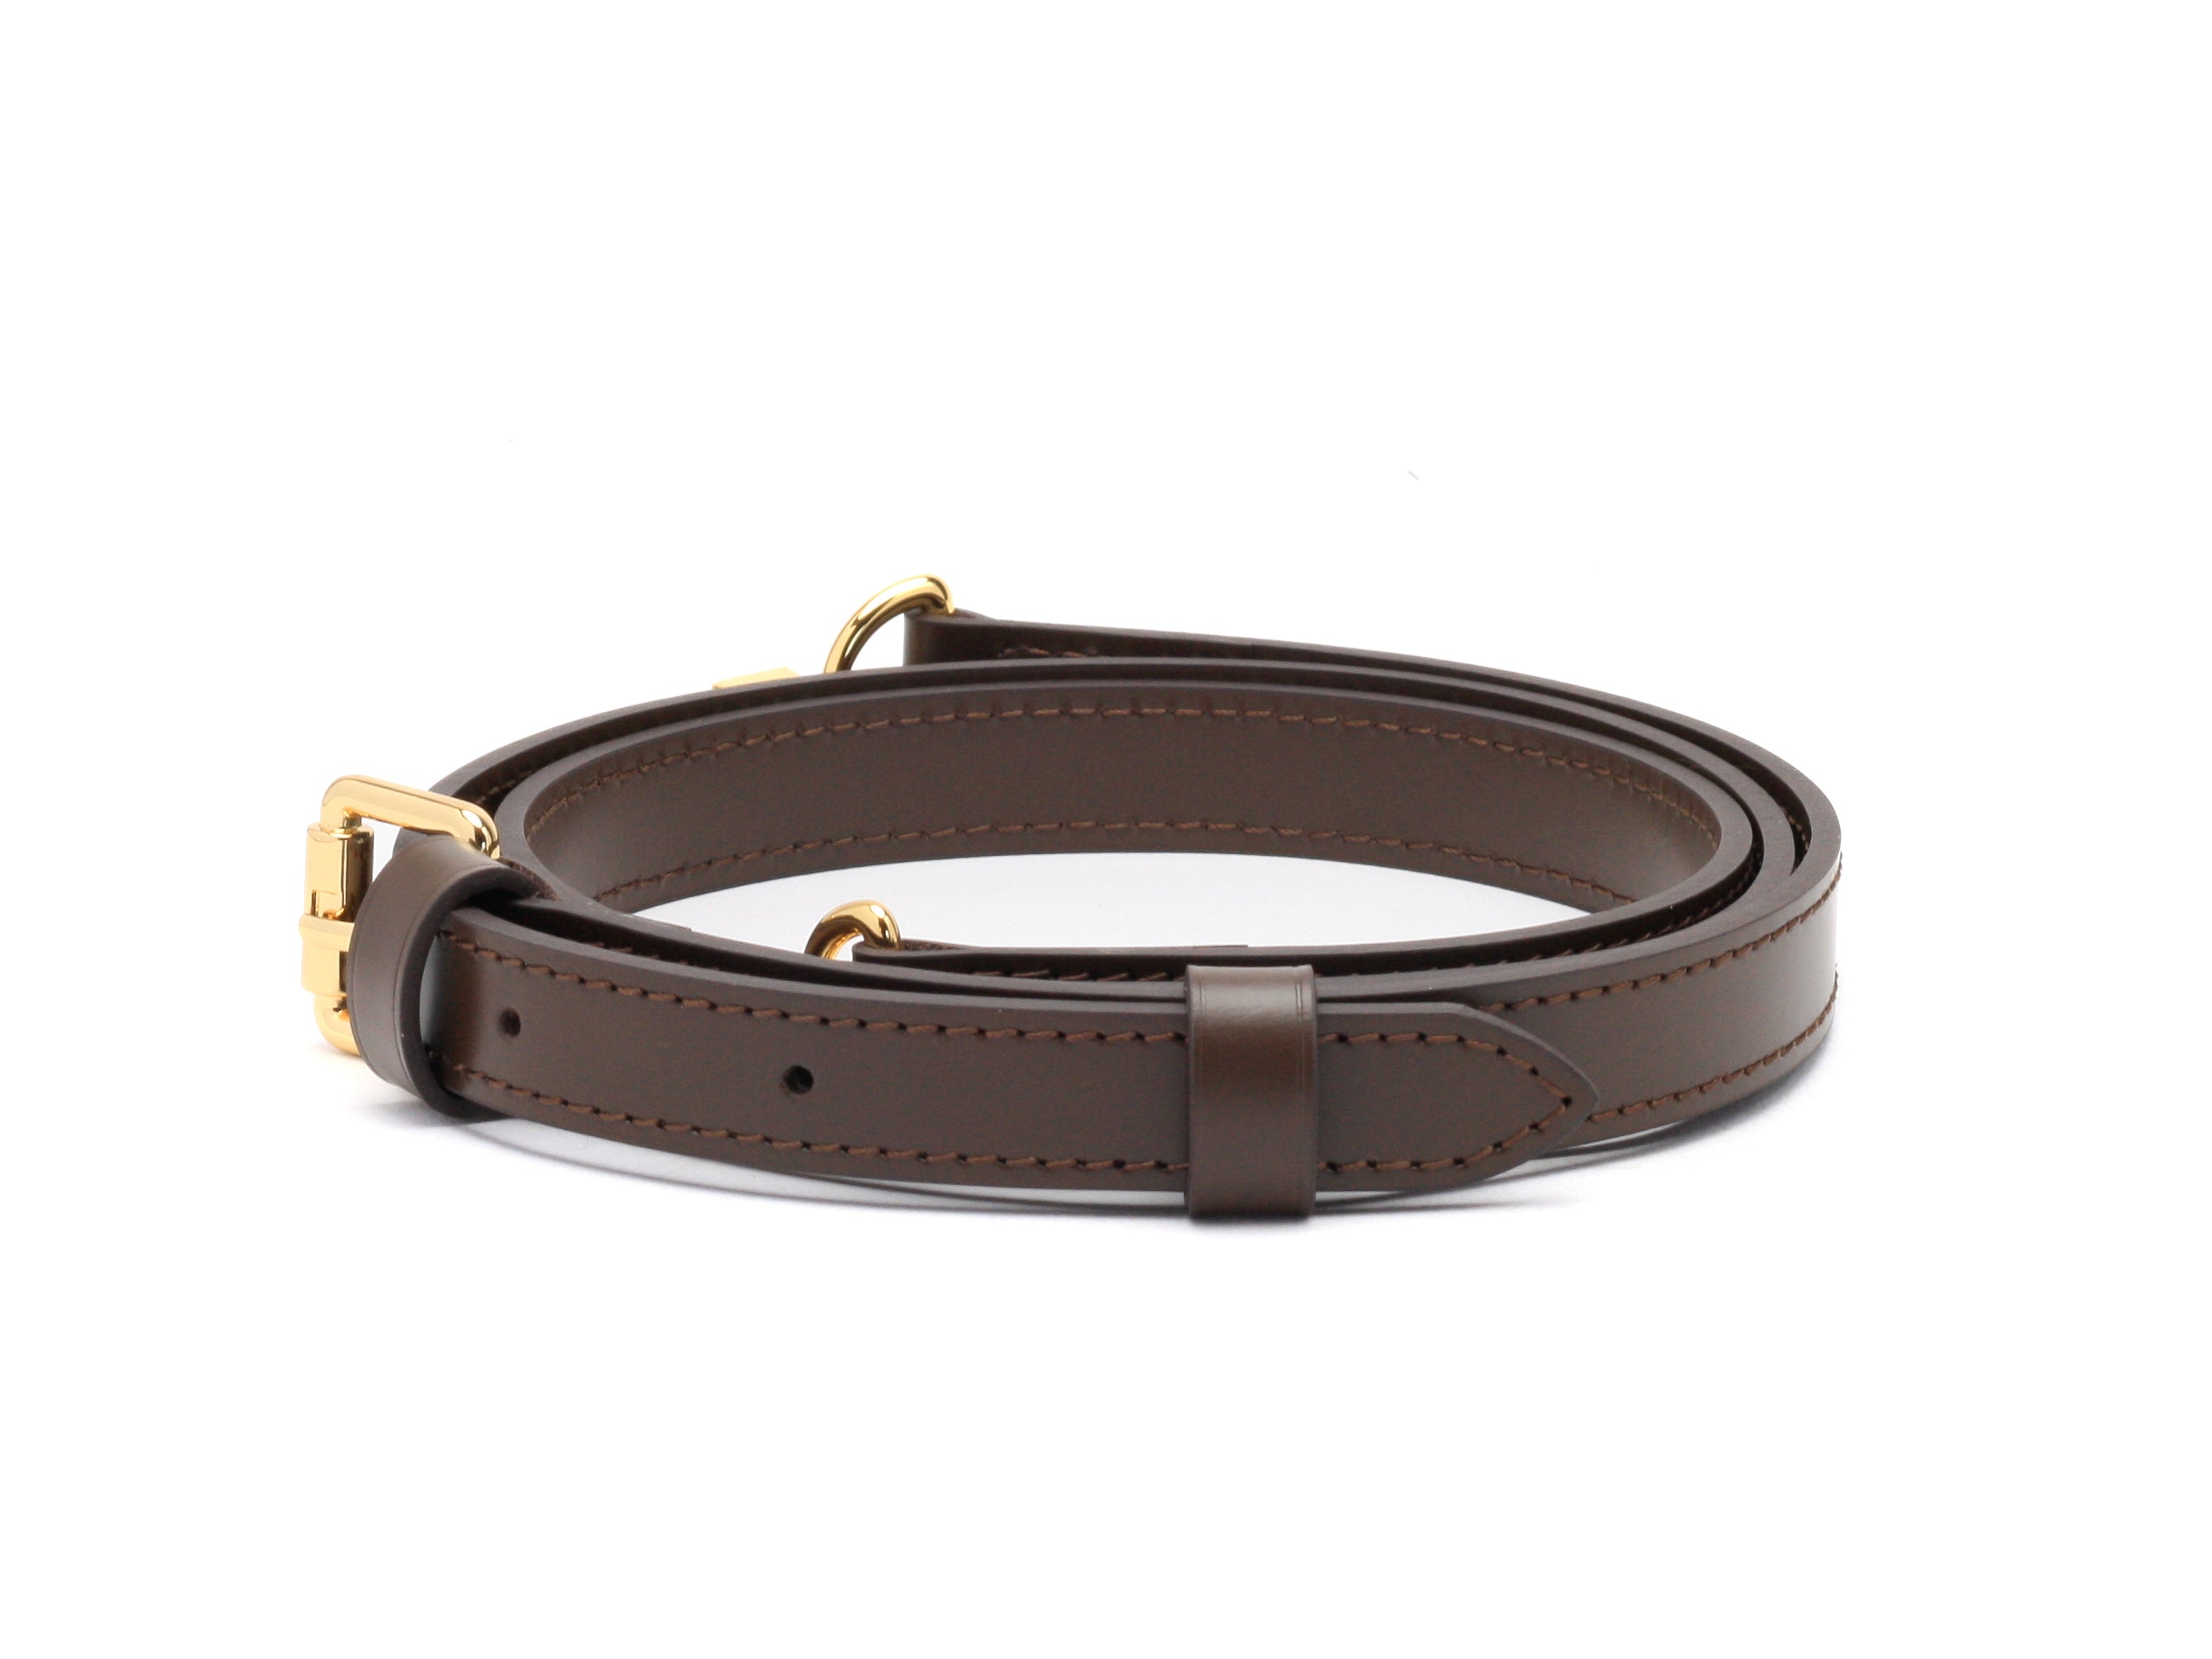 New Vachetta Leather Strap 250mm Replacement for Speedy 30, Travel bag